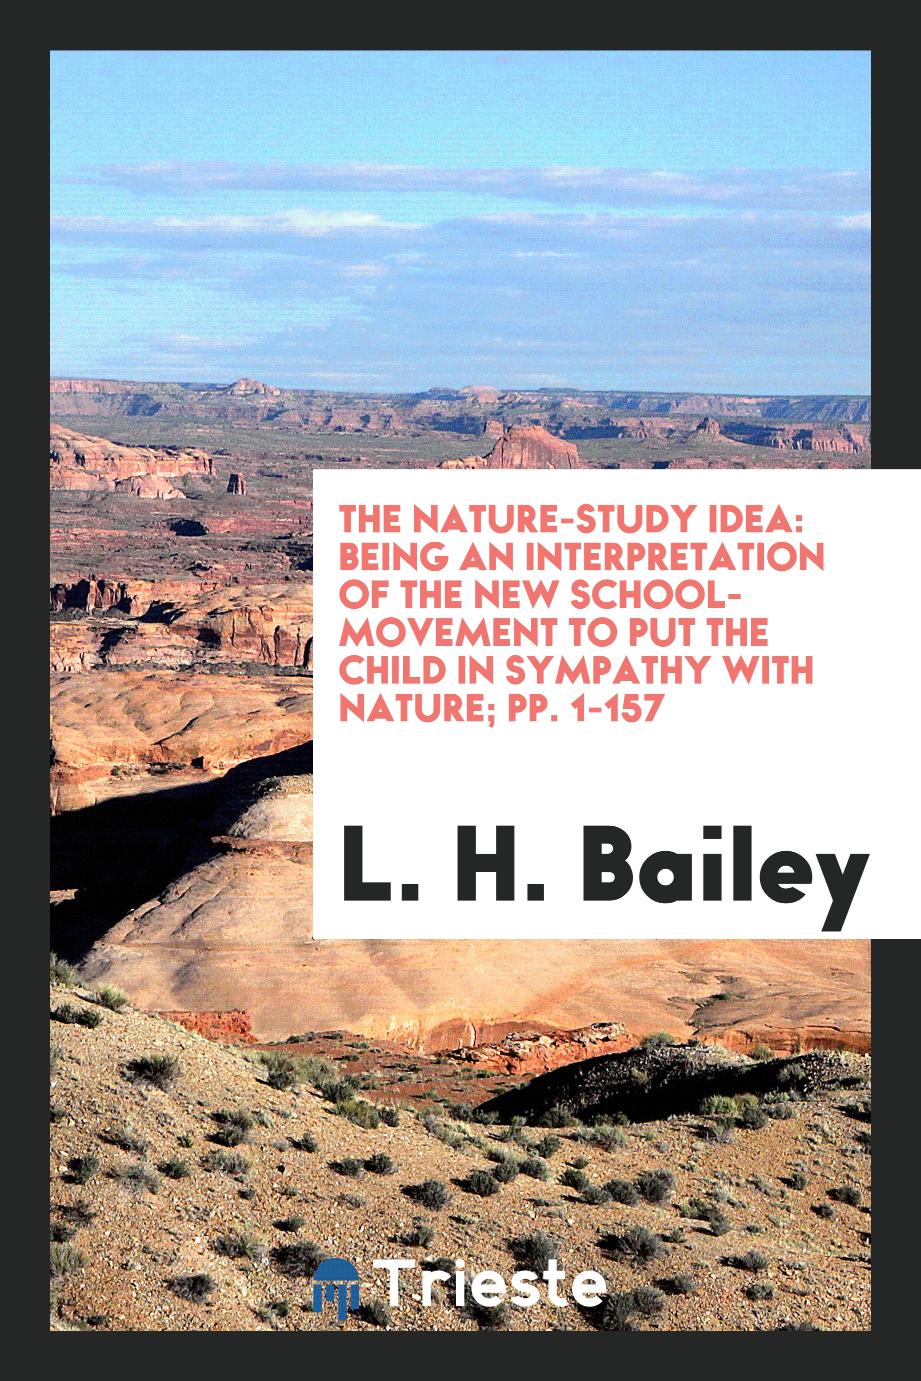 The Nature-study Idea: Being an Interpretation of the New School-movement to Put the Child in Sympathy with Nature; pp. 1-157